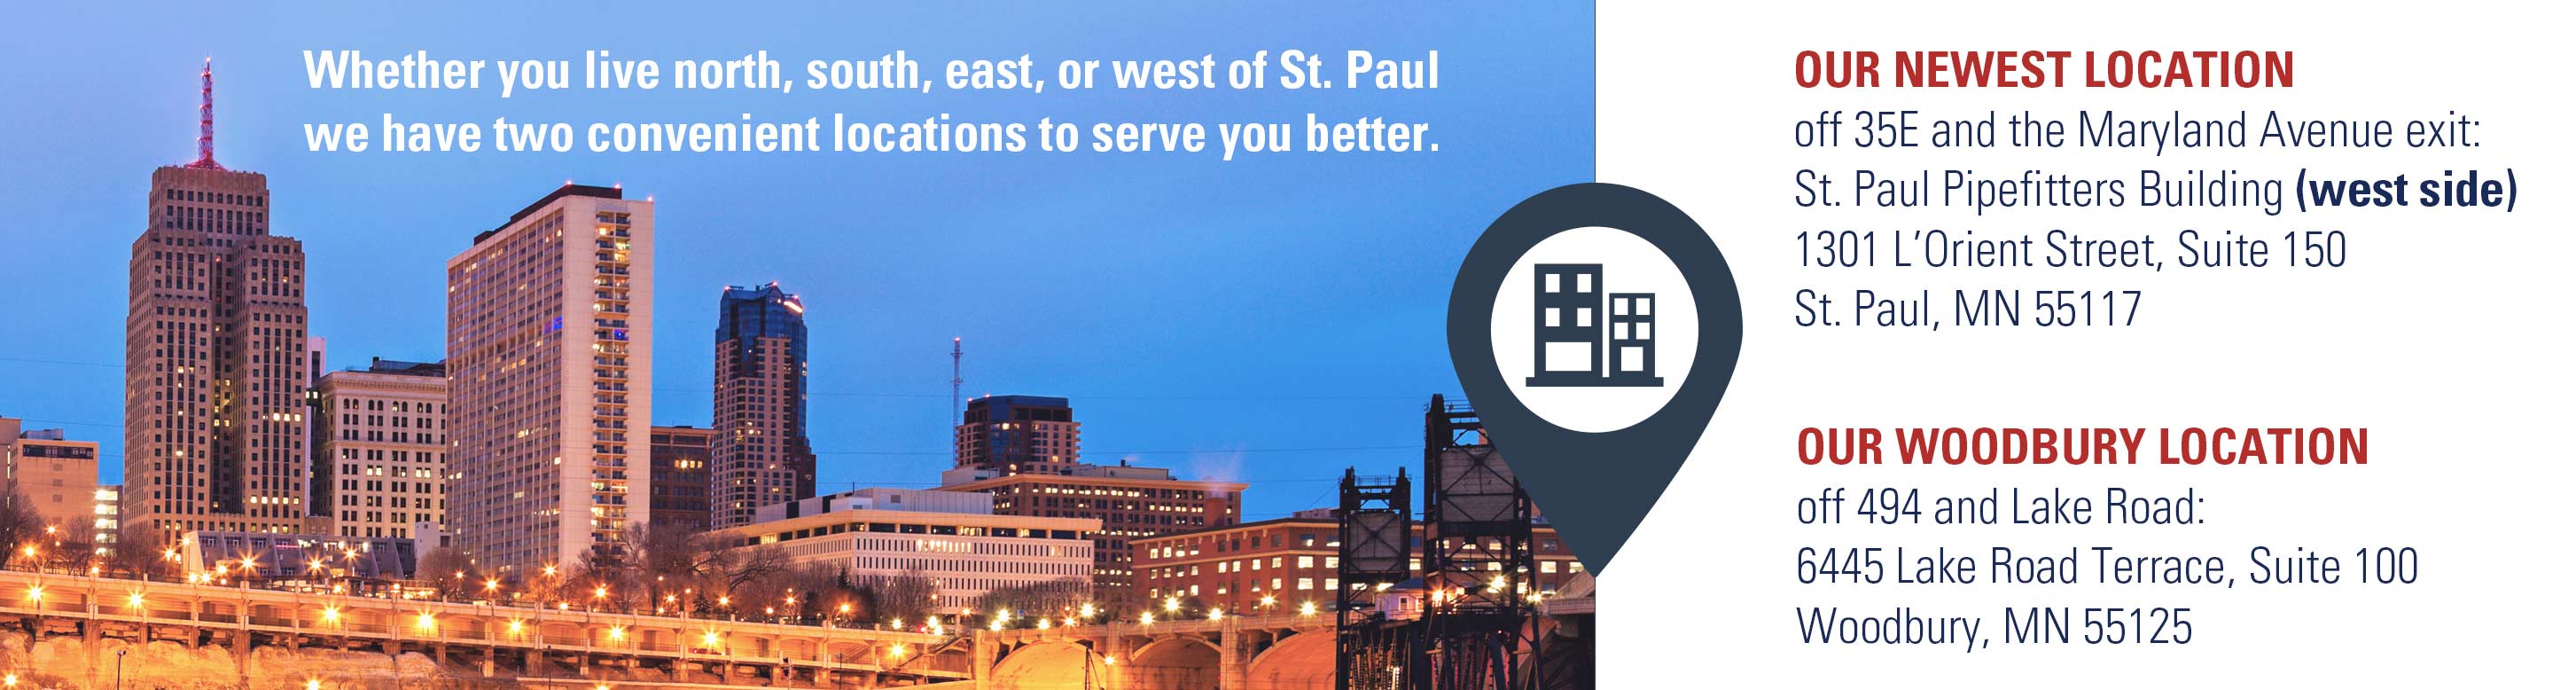 Whether you live north, south, east, or west of St. Paul, we have two convenient location sto serve you better.